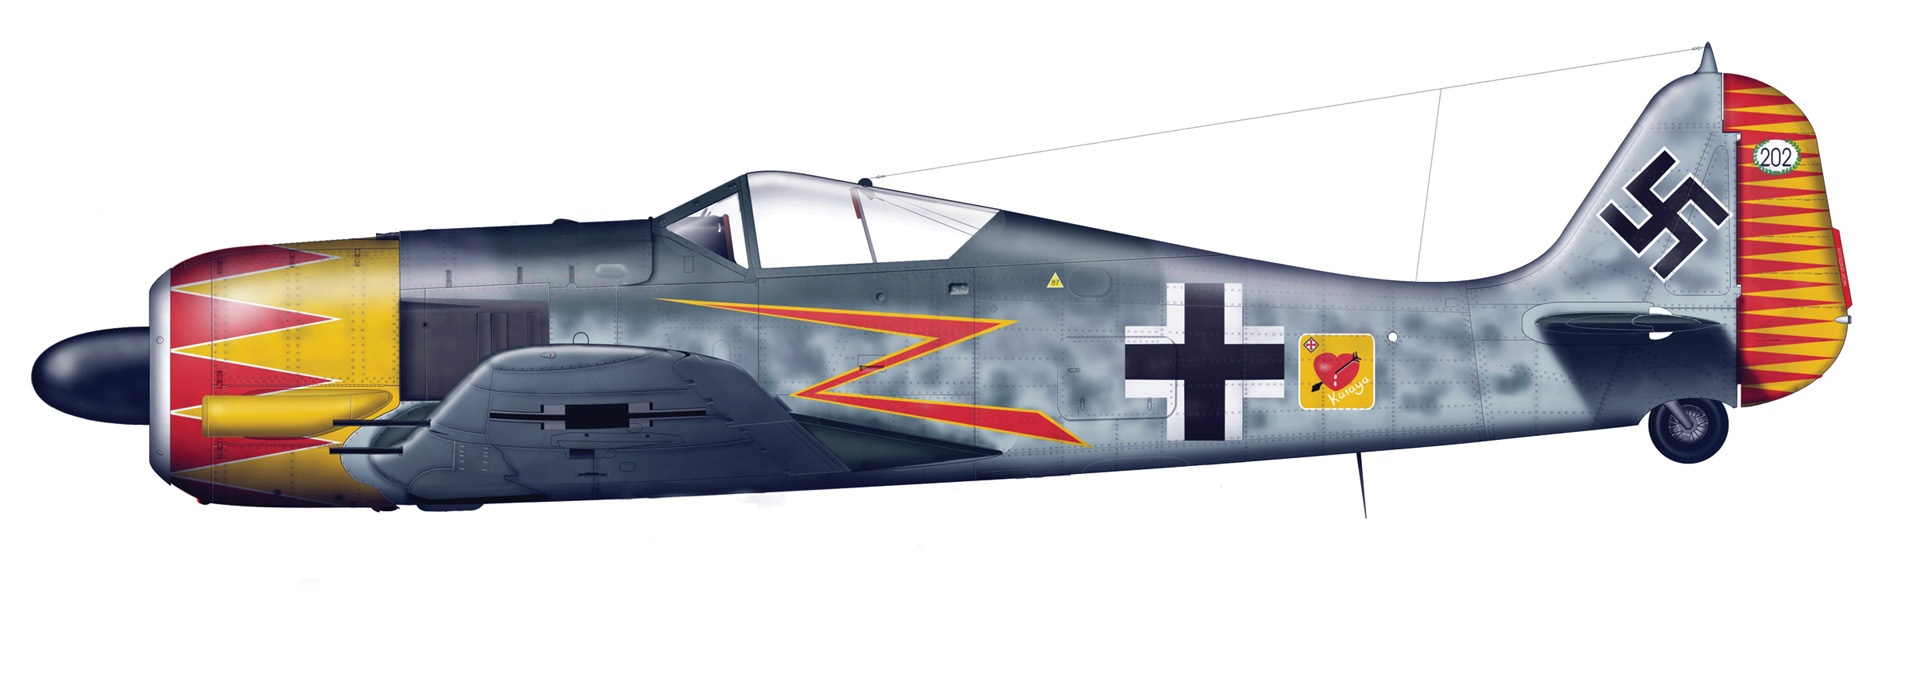 This brightly painted Fw-190 A-5 was flown by Luftwaffe Major Hermann Graf, who commanded a fighter training unit in southern France in 1943.